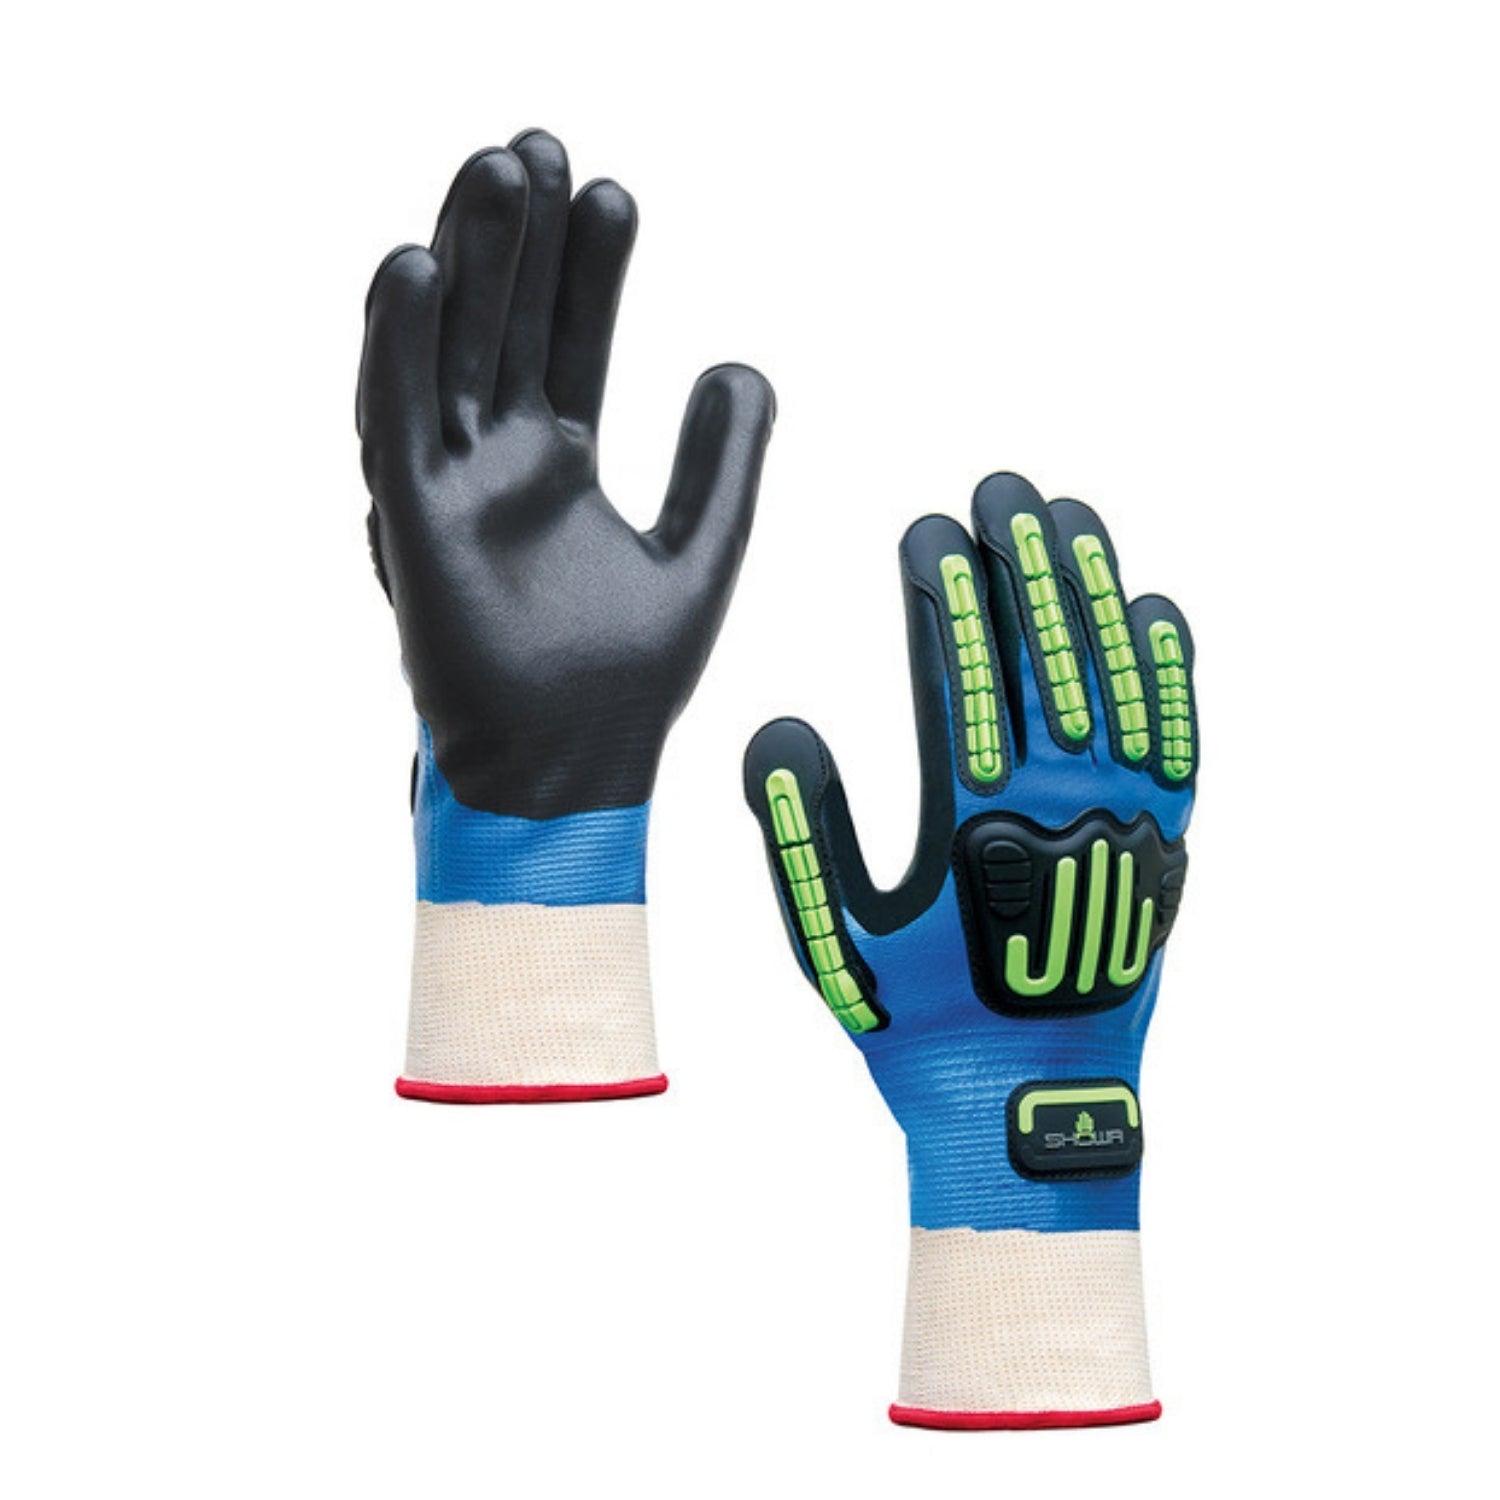 SHOWA 377-IP - Impact Protection Gloves